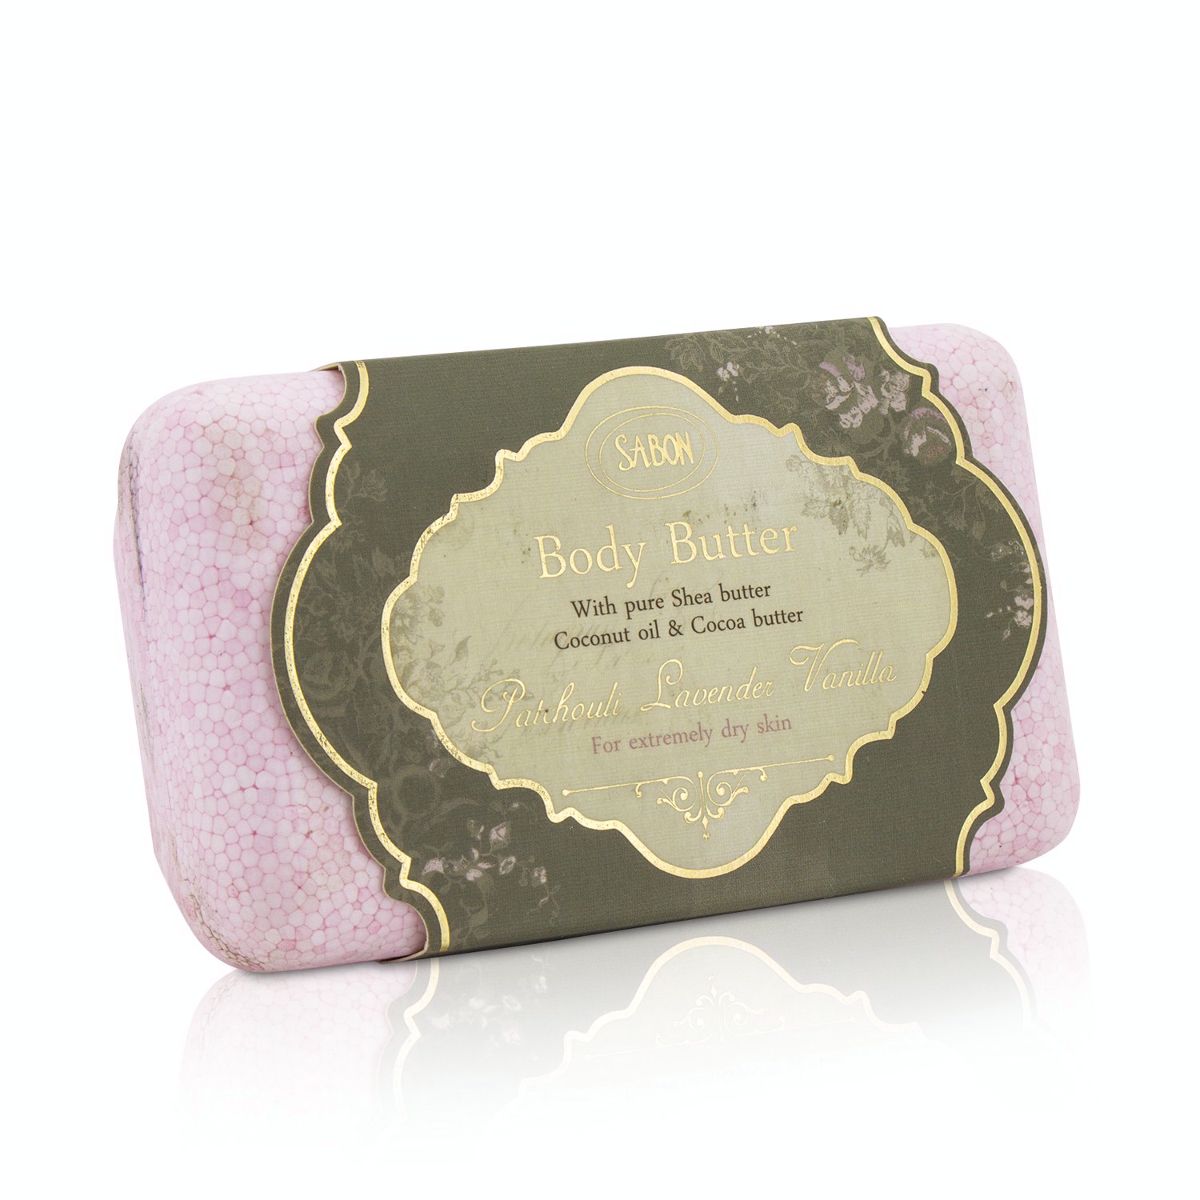 Body Butter (For Extremely Dry Skin) - Patchouli Lavender Vanilla Sabon Image